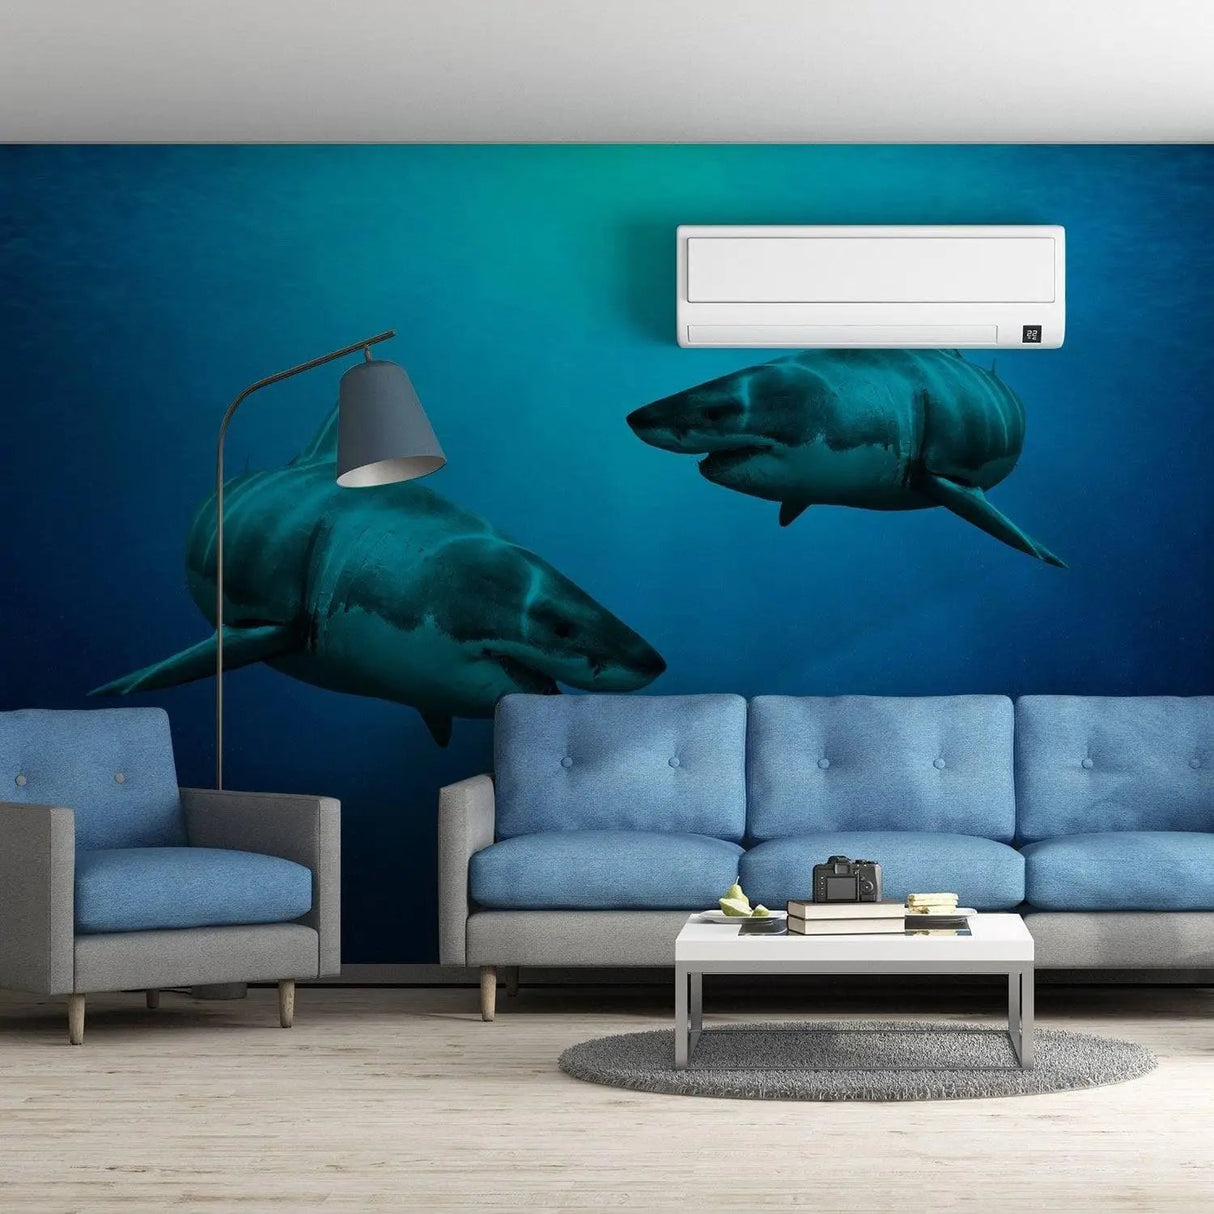 Underwater Ocean Wall Stickers - 3D Removable Decal for Home 205 x 120